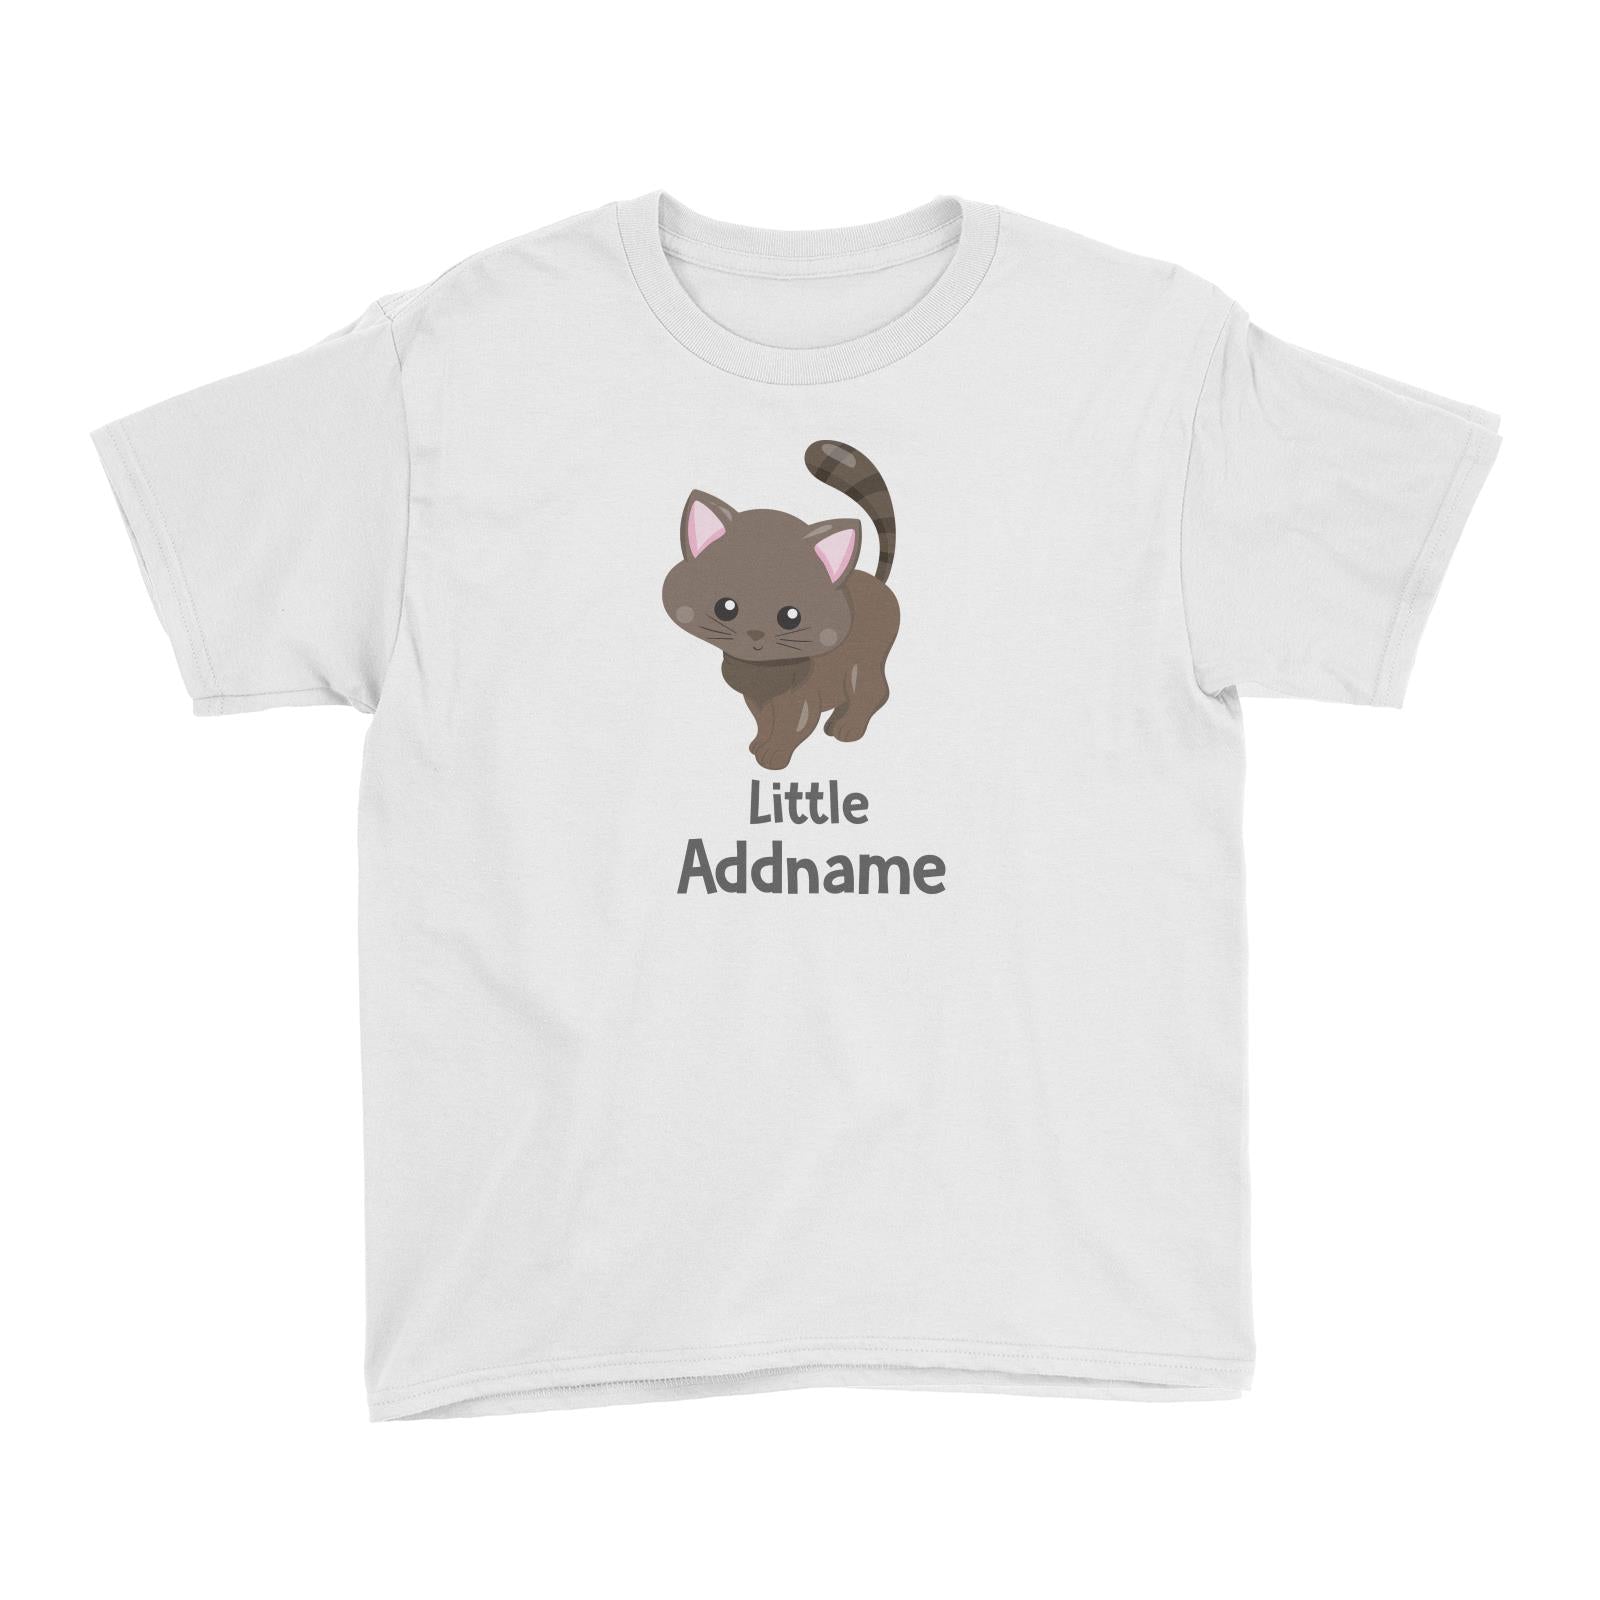 Adorable Cats Dark Brown Cat Little Addname Kid's T-Shirt